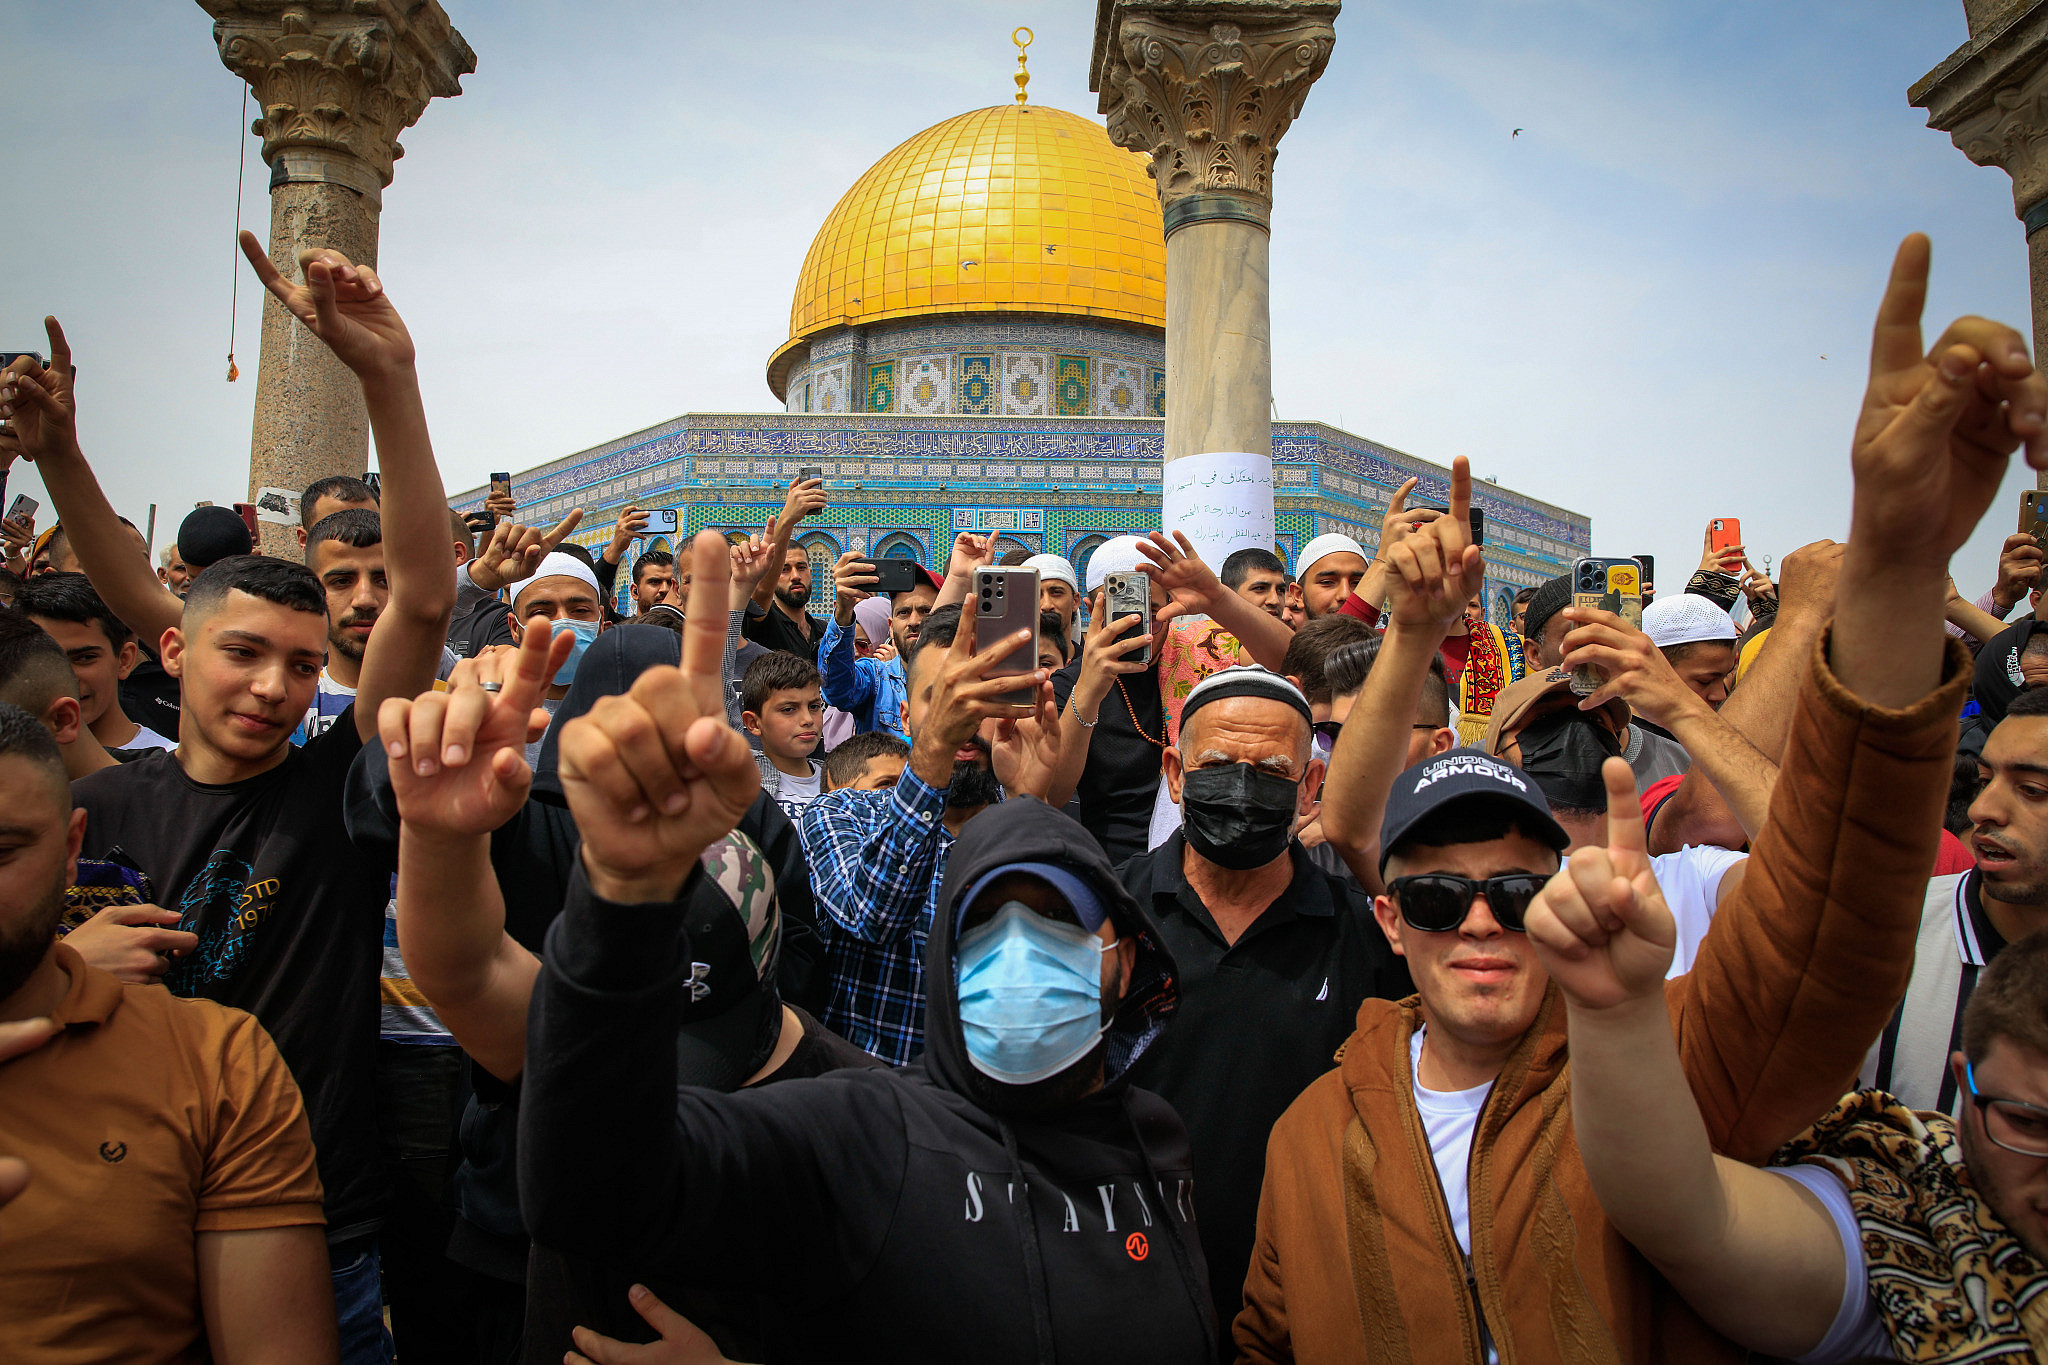 People shout slogans as thousands of Muslim worshipers attend the first Friday prayers of the holy month of Ramadan, at the Al Aqsa Mosque Compound in Jerusalem's Old City, Friday, April 8, 2022. (Sliman Khader/Flash90)